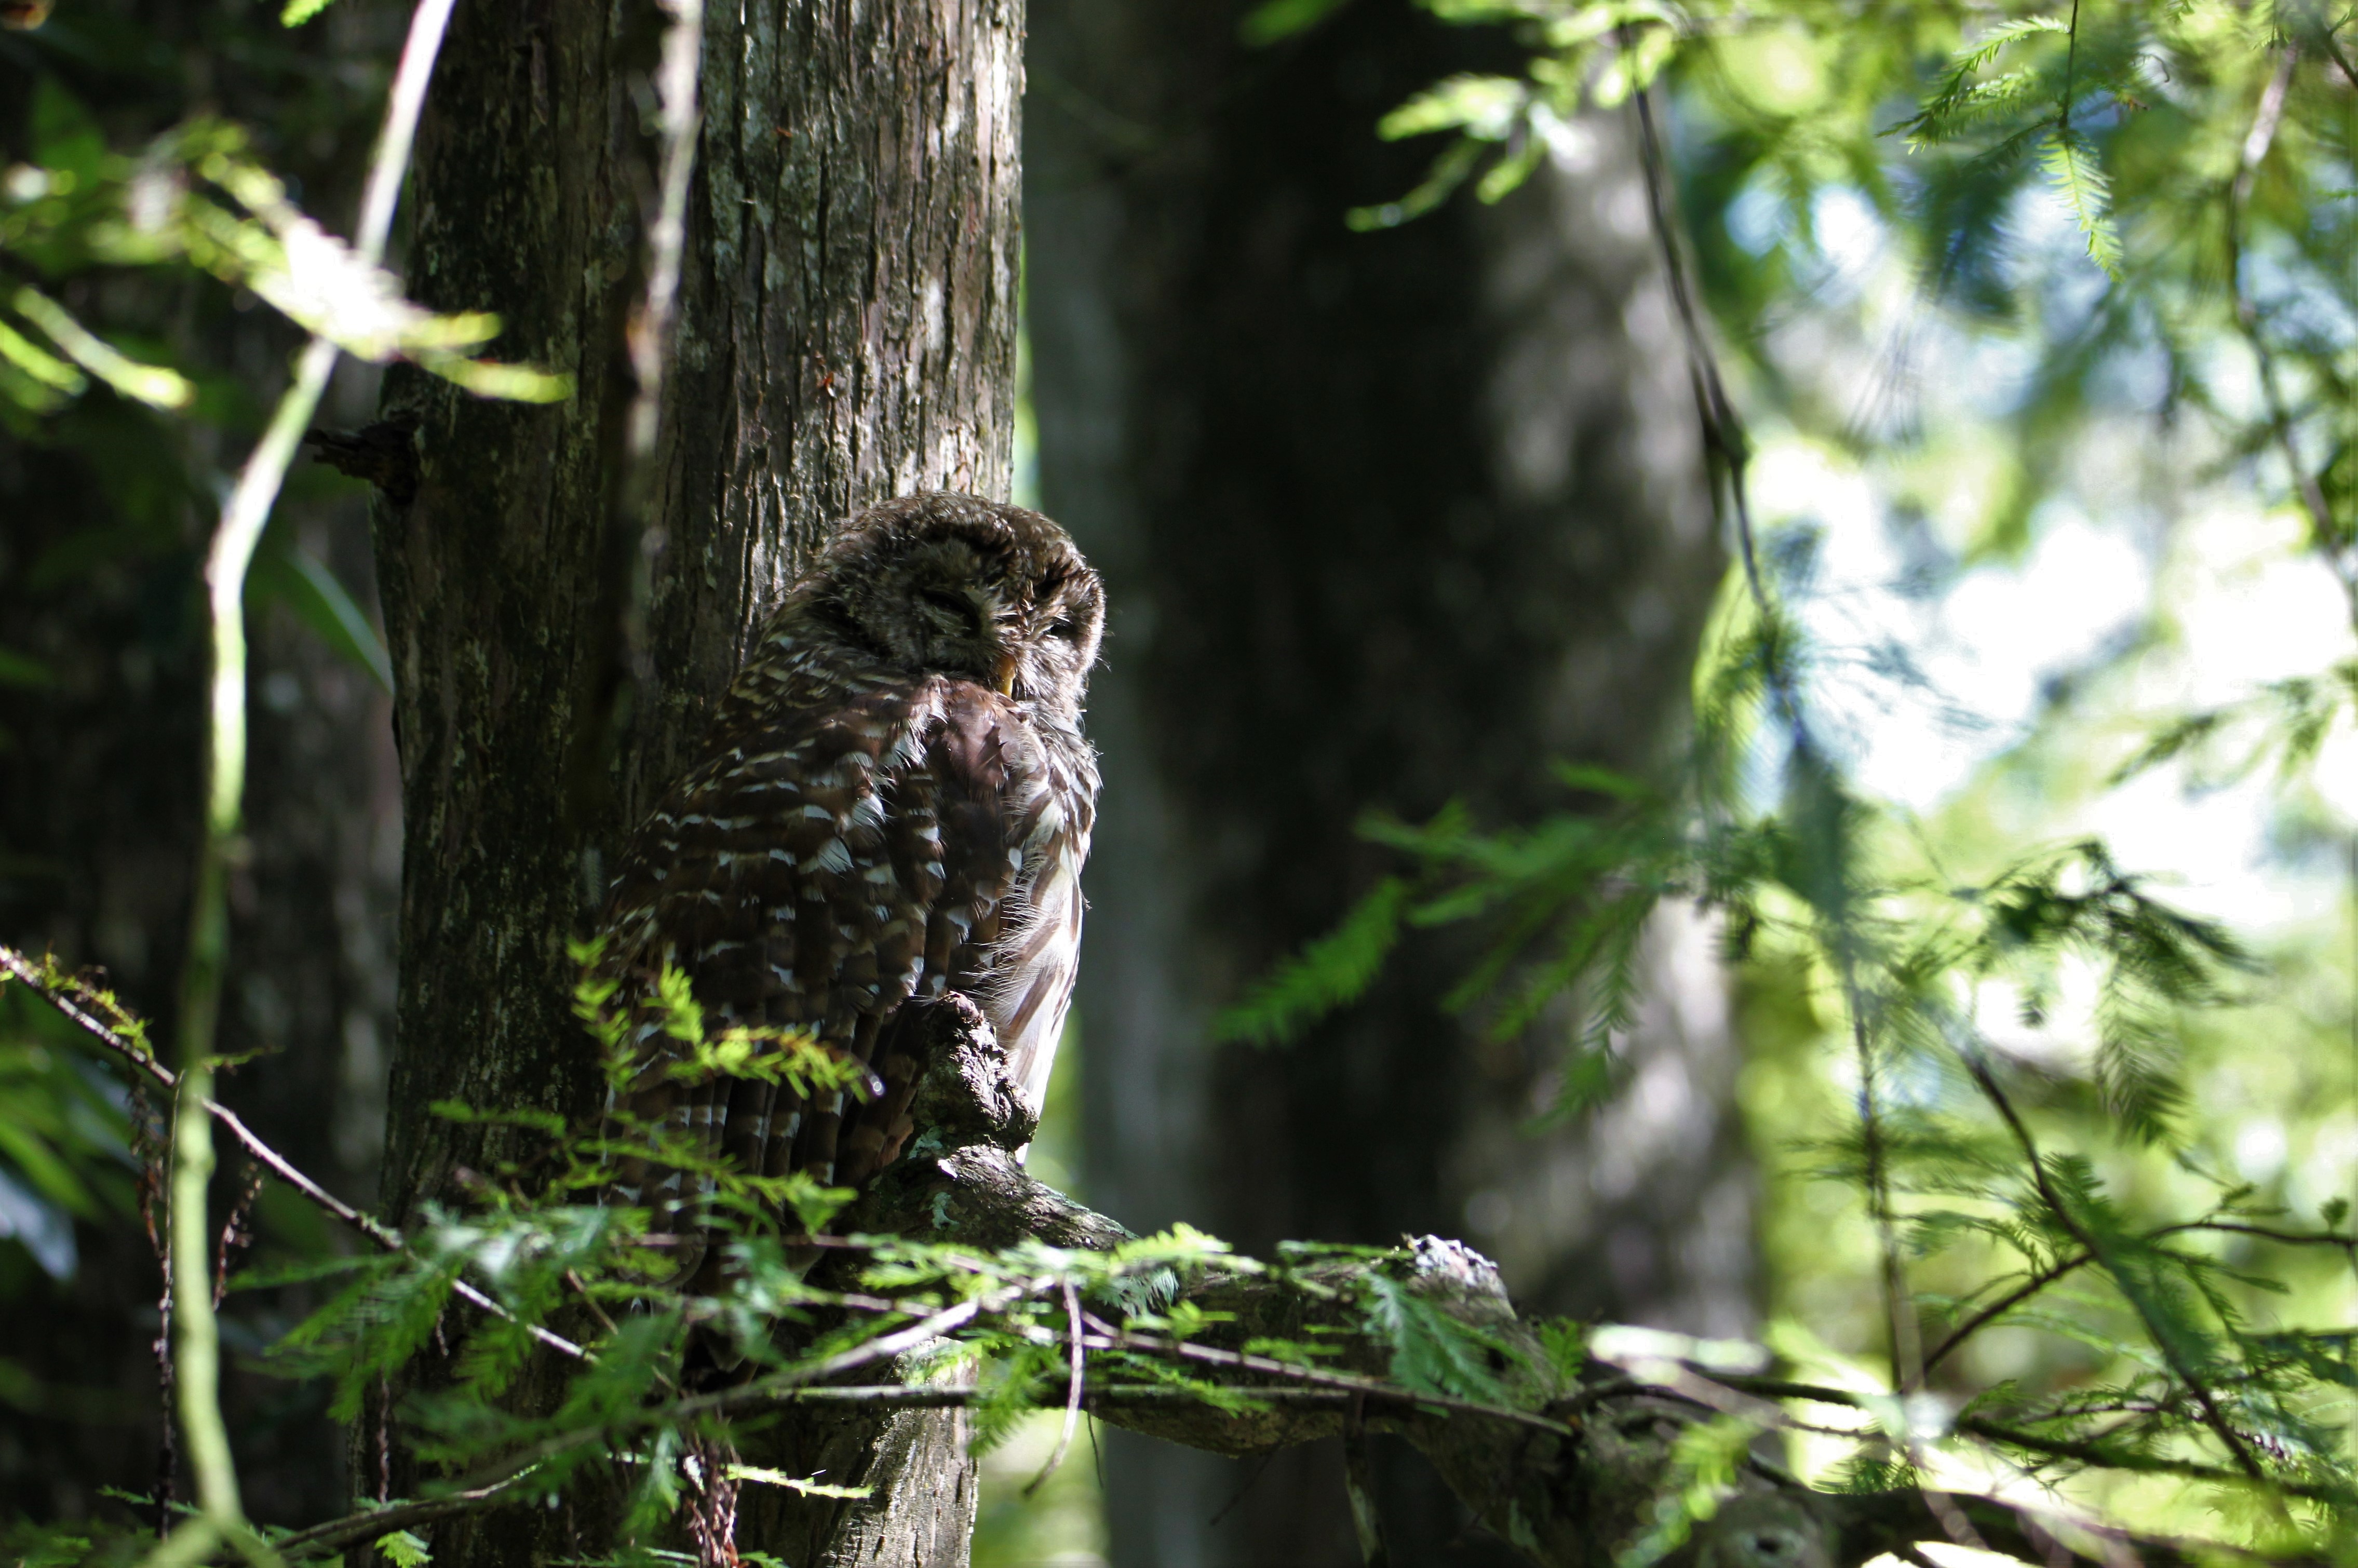 A barred owl in a tree